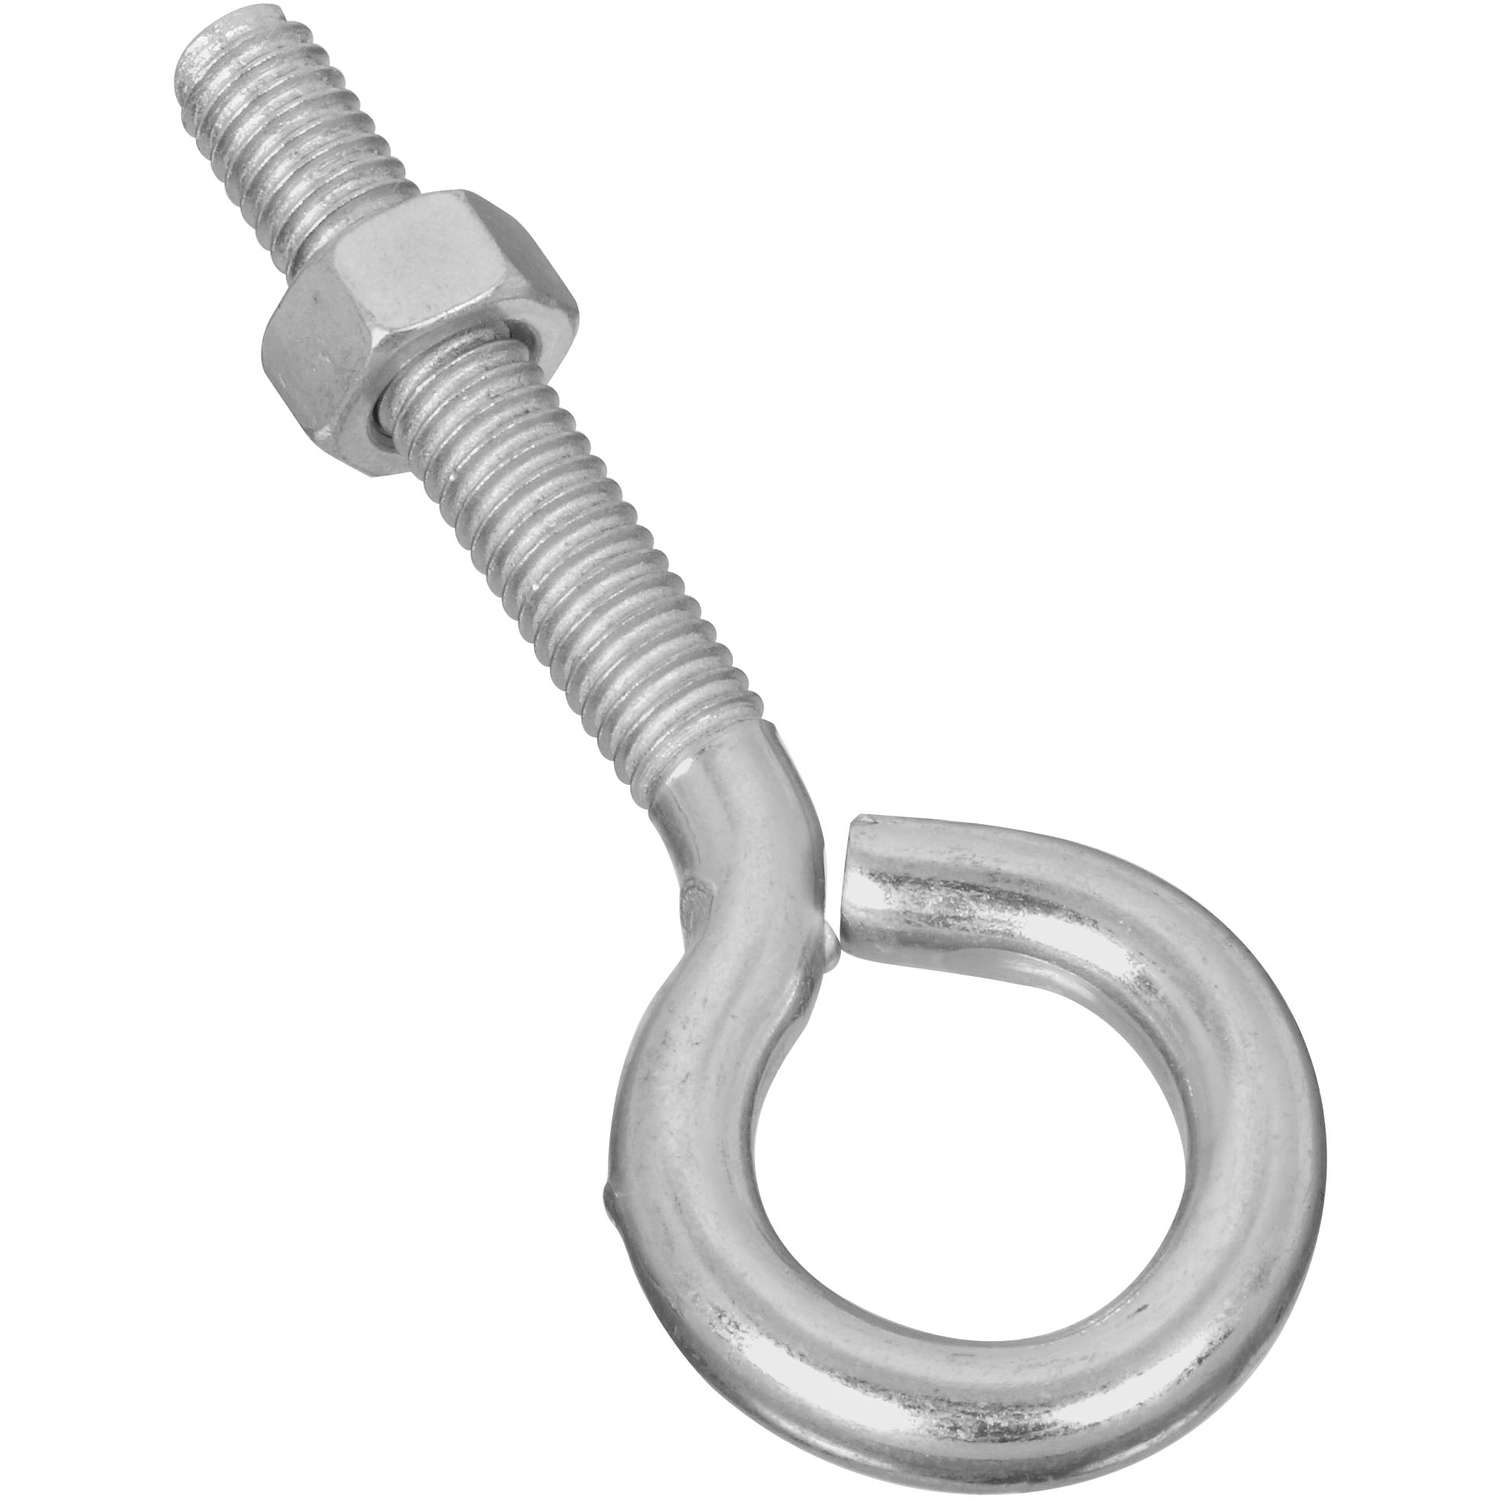 x 3-1/4 in National Hardware 5/16 in L Zinc-Plated Steel Eyebolt Case of 100 